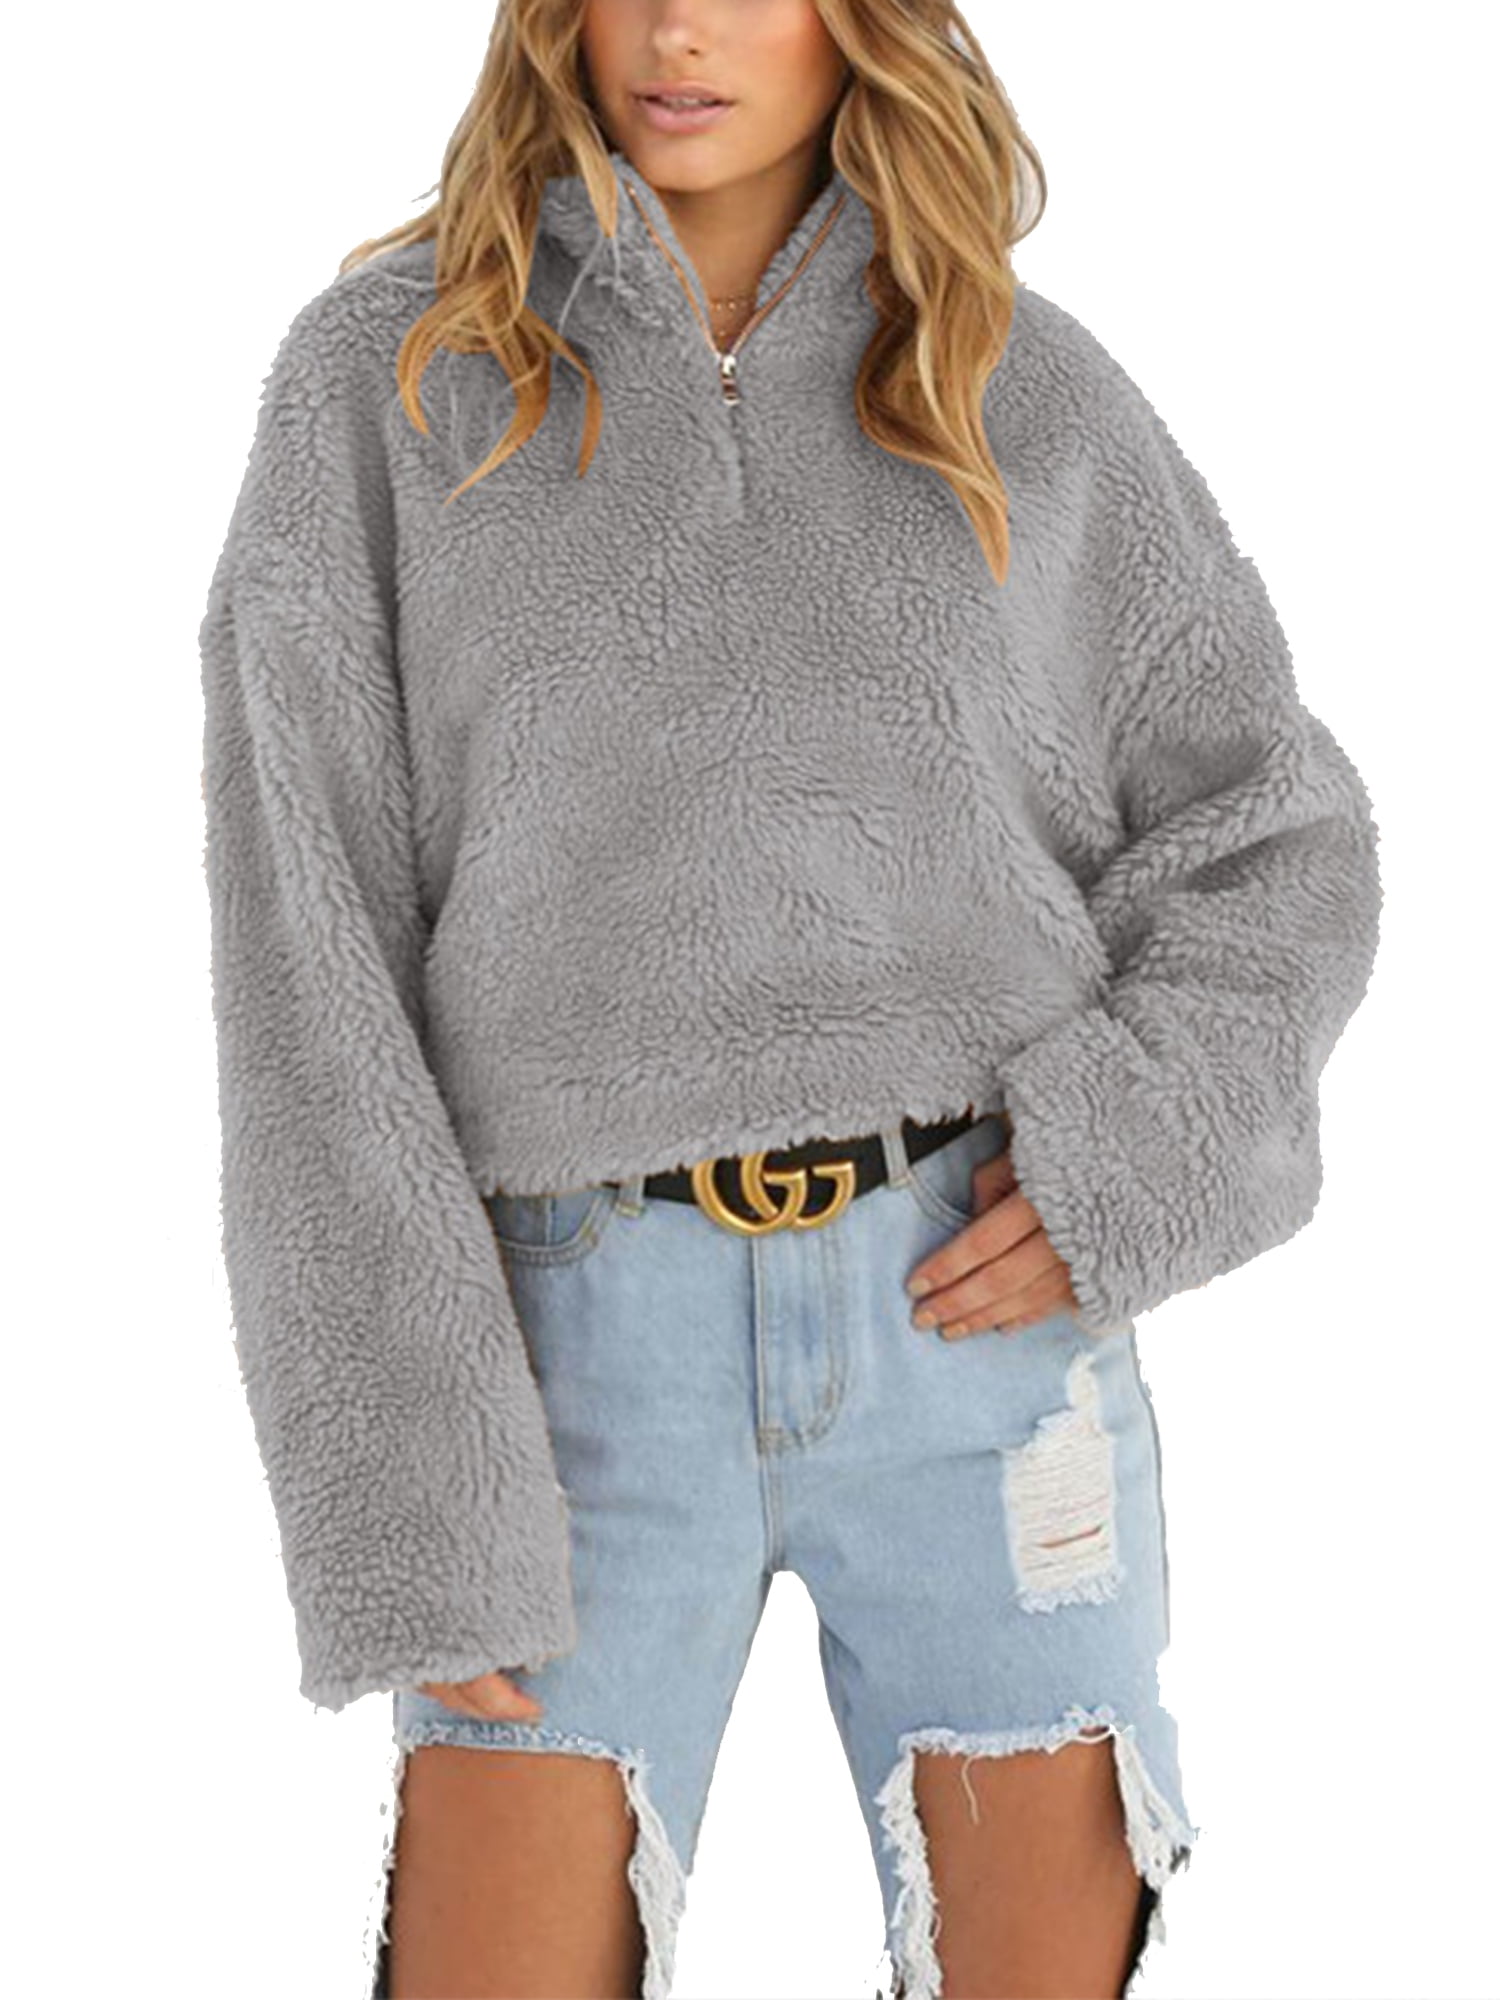 Women Sweaters and Pullovers Autumn Winter Half Lantern Sleeve Sweater Thick Warm Jumper Gray,M